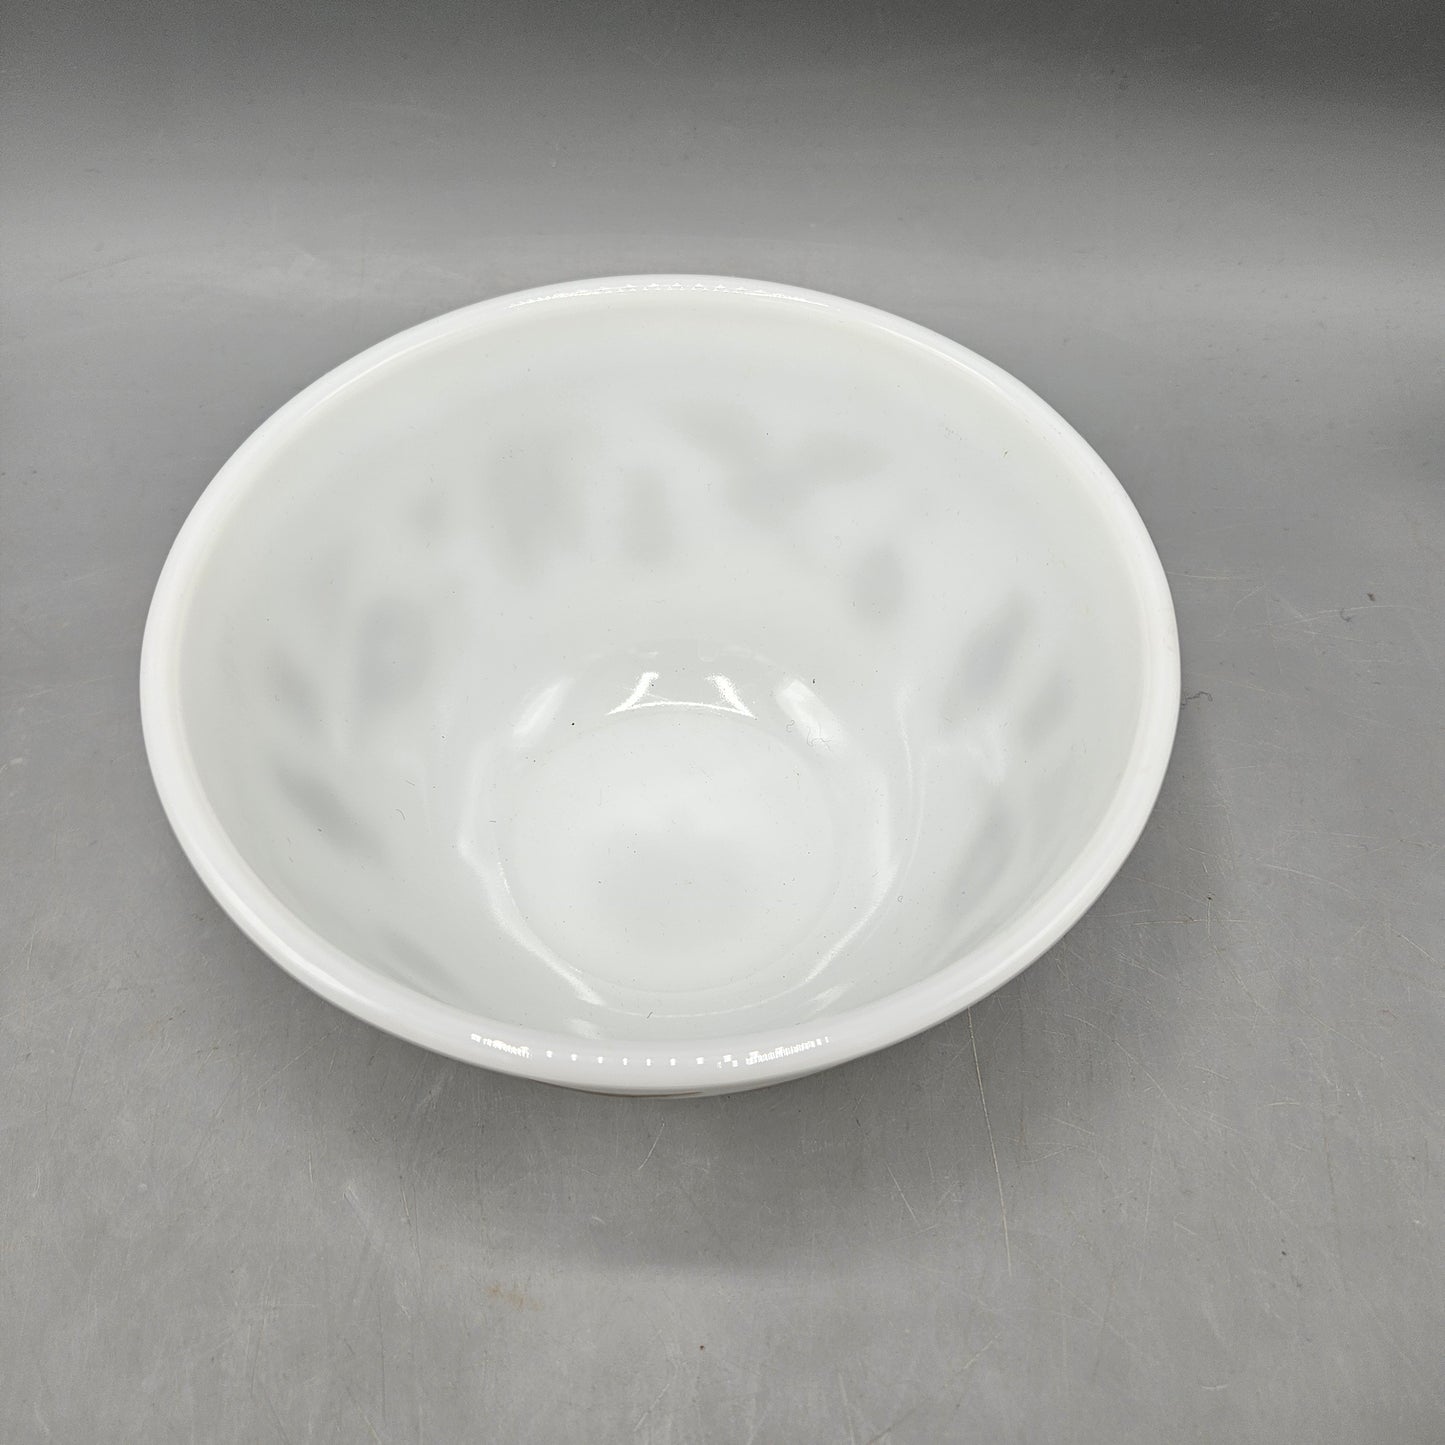 Vintage Pyrex Early American Mixing Bowl 1 1/2 PT